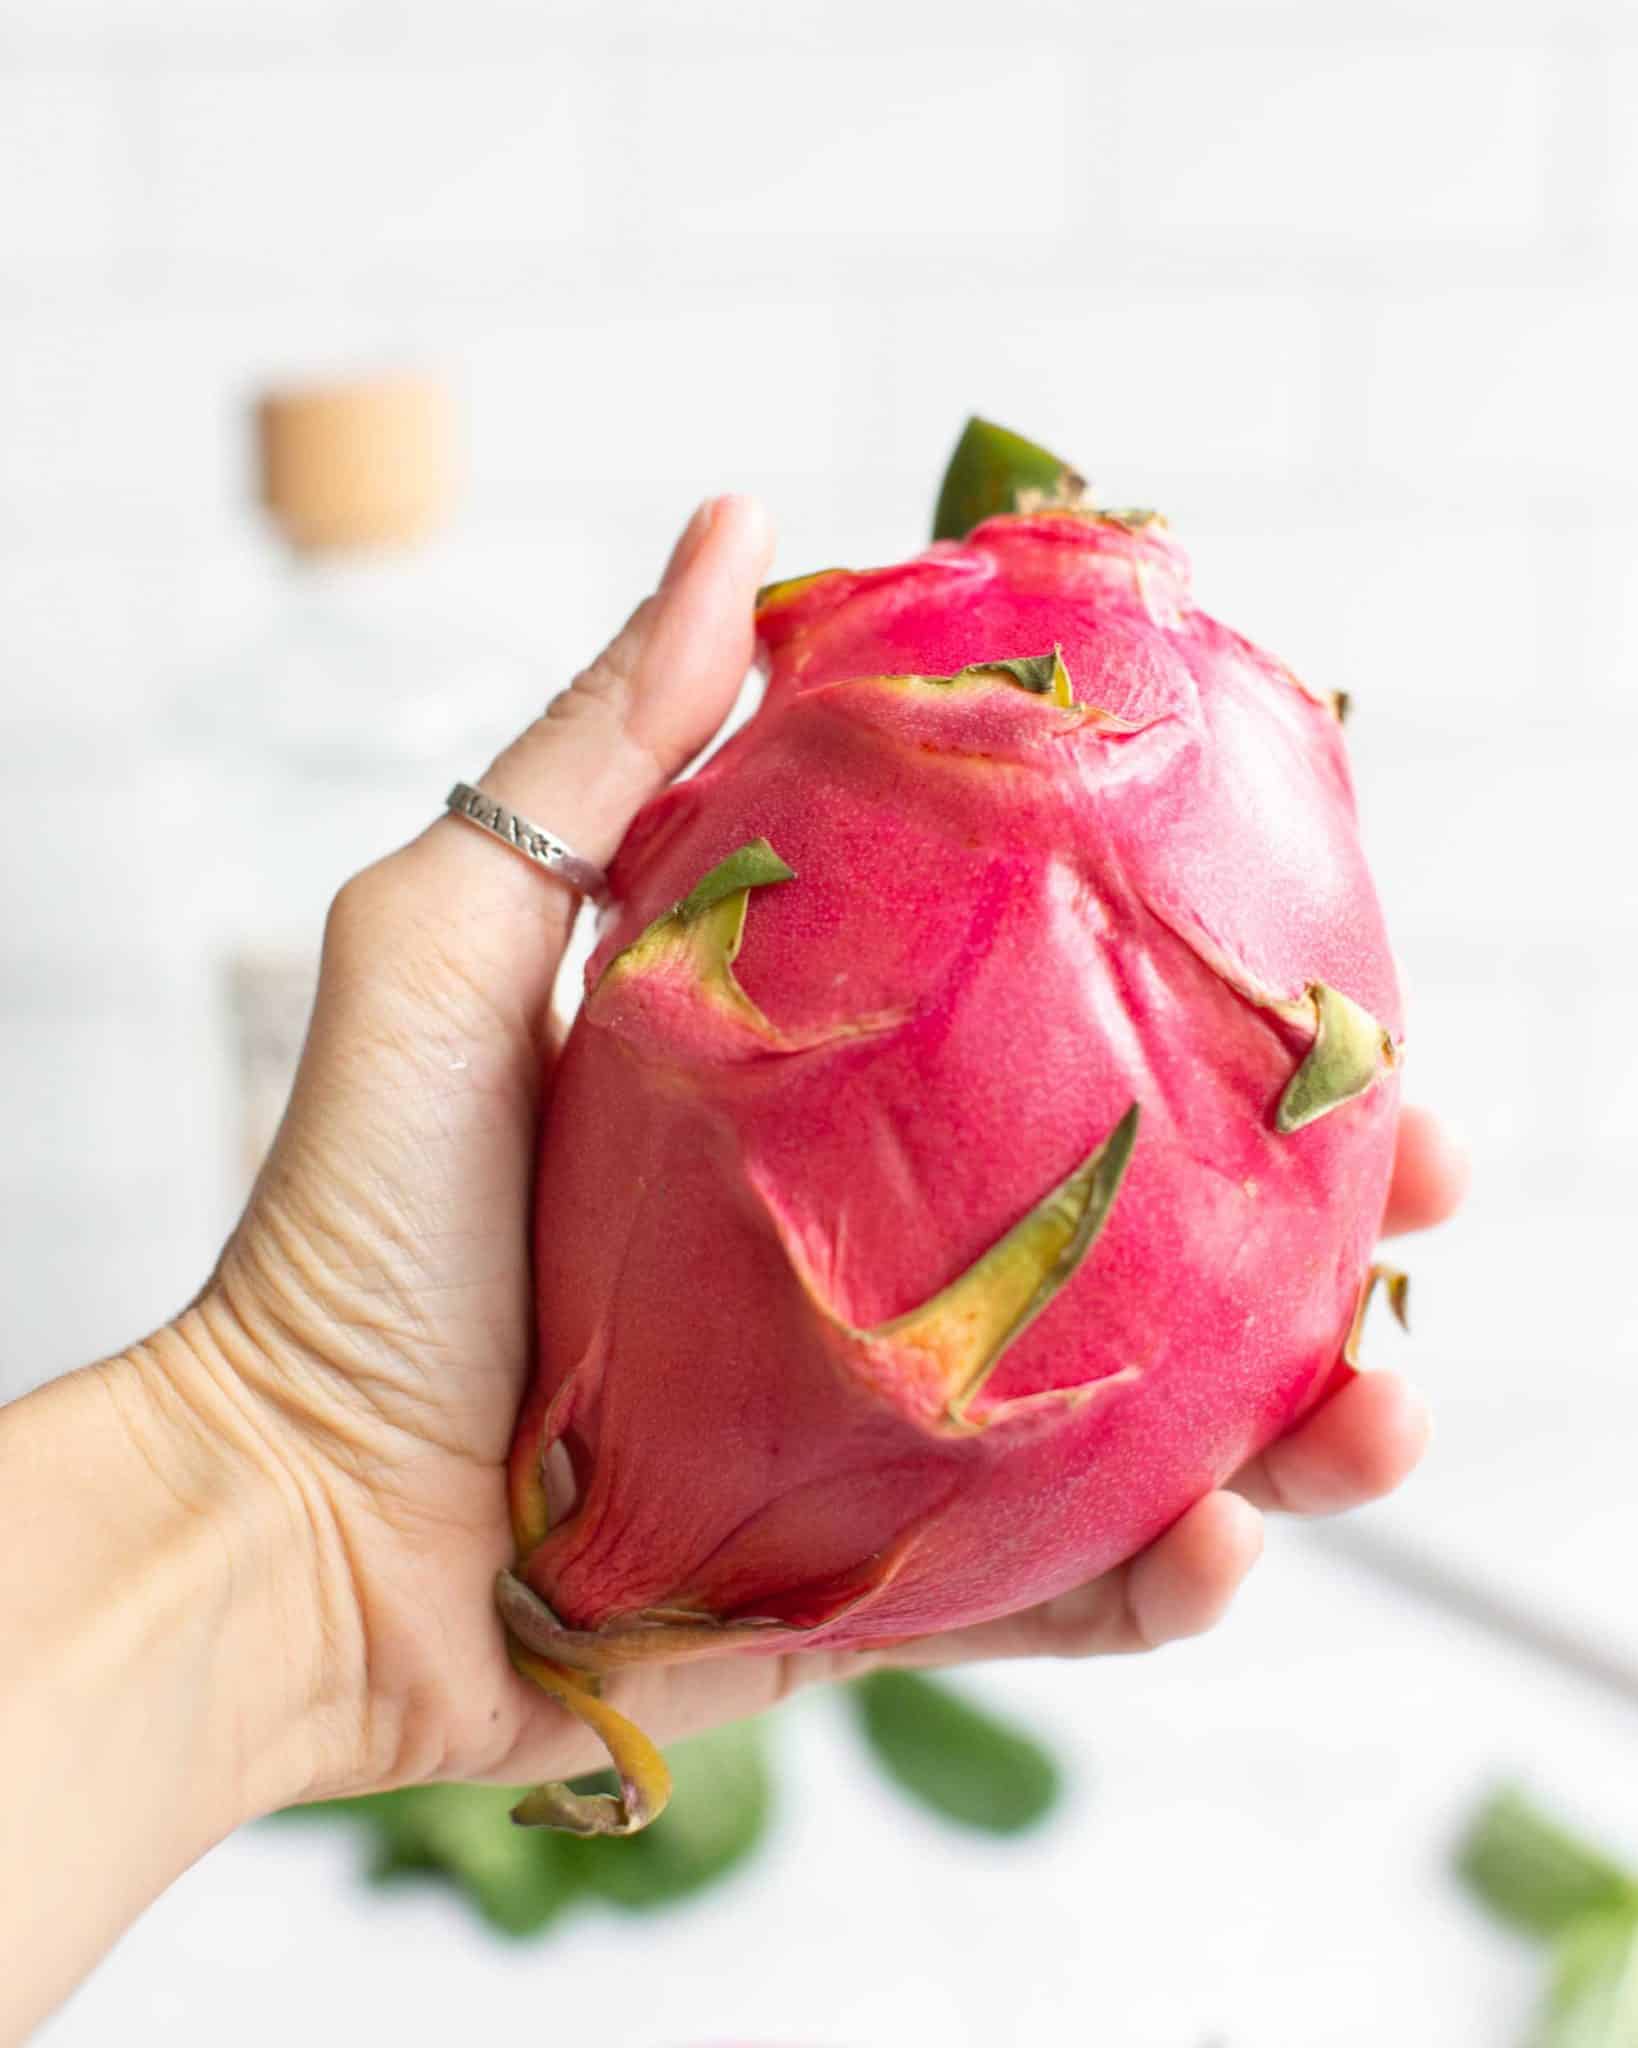 Holding out a Dragonfruit Pink Skin